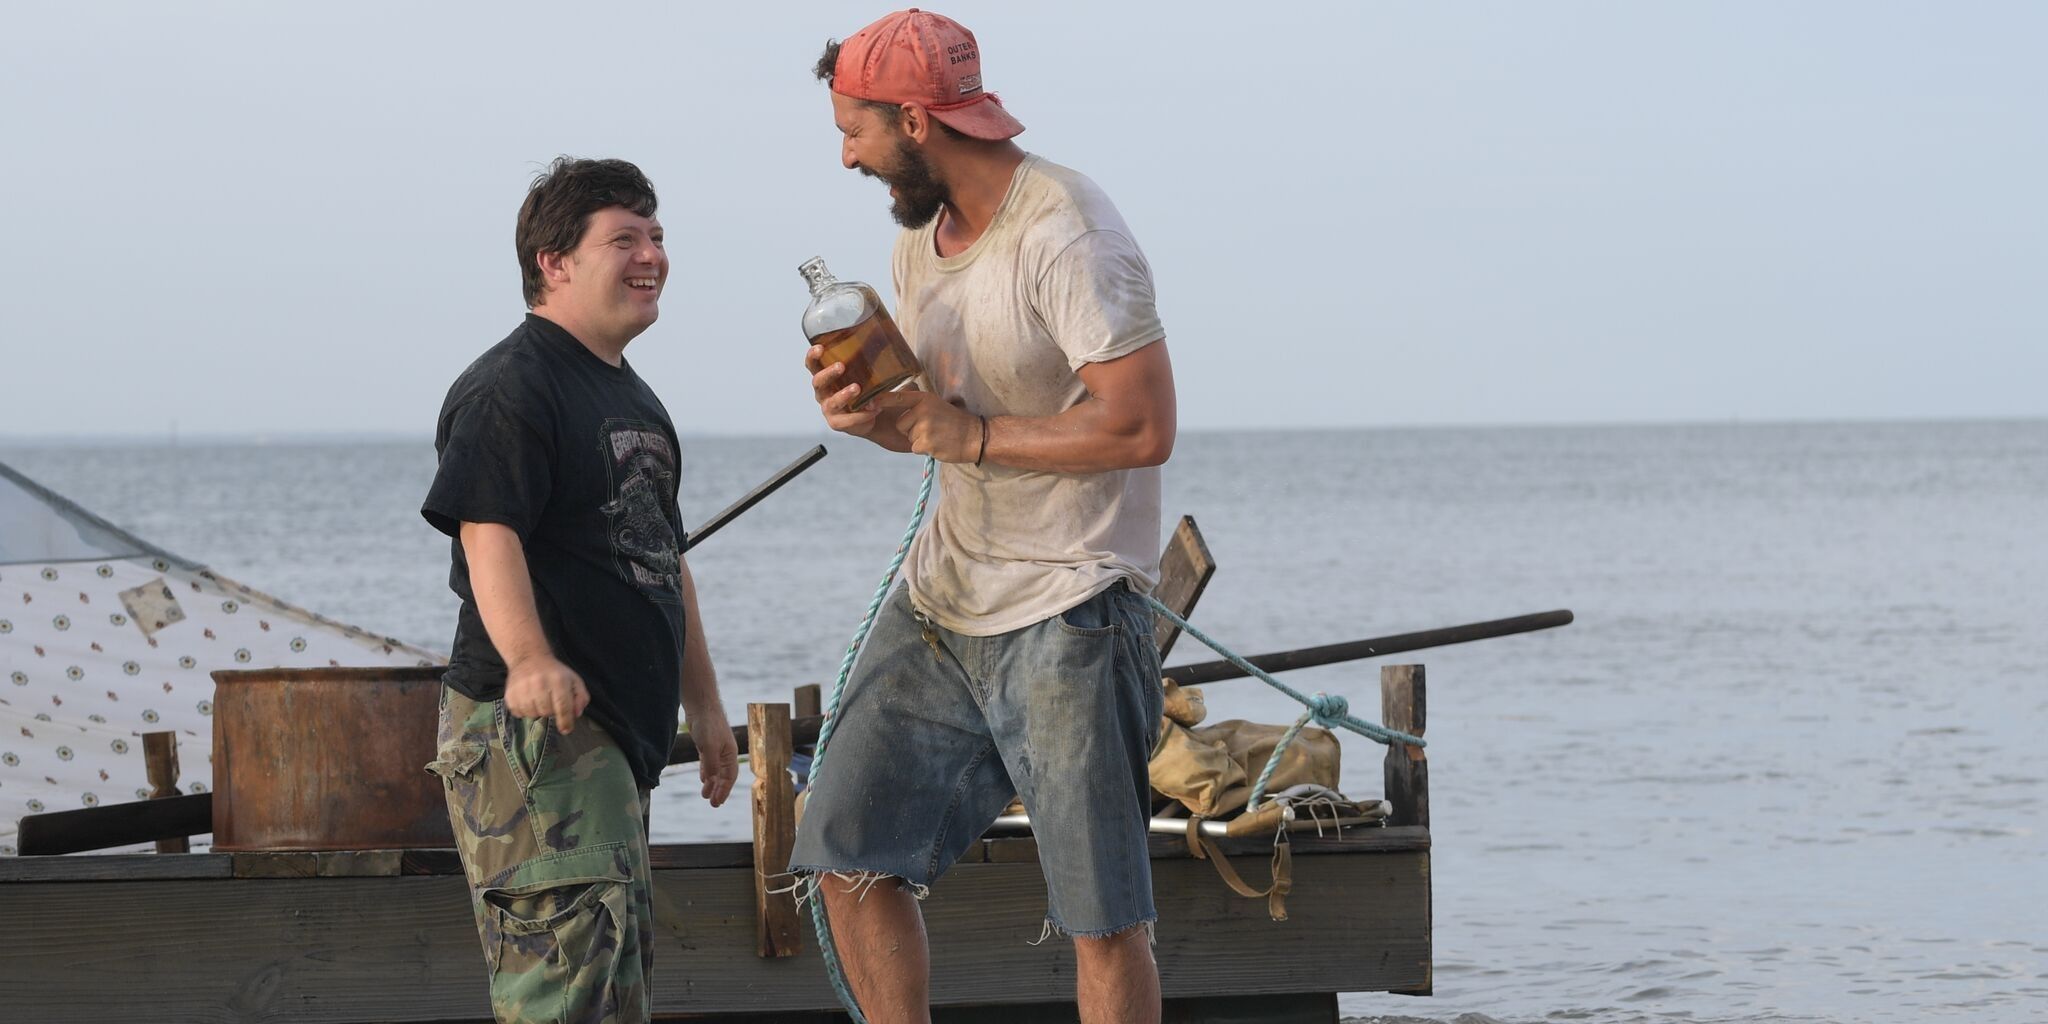 Zachary Gottsagen and Shia LaBeouf laughing on a boat in The Peanut Butter Falcon